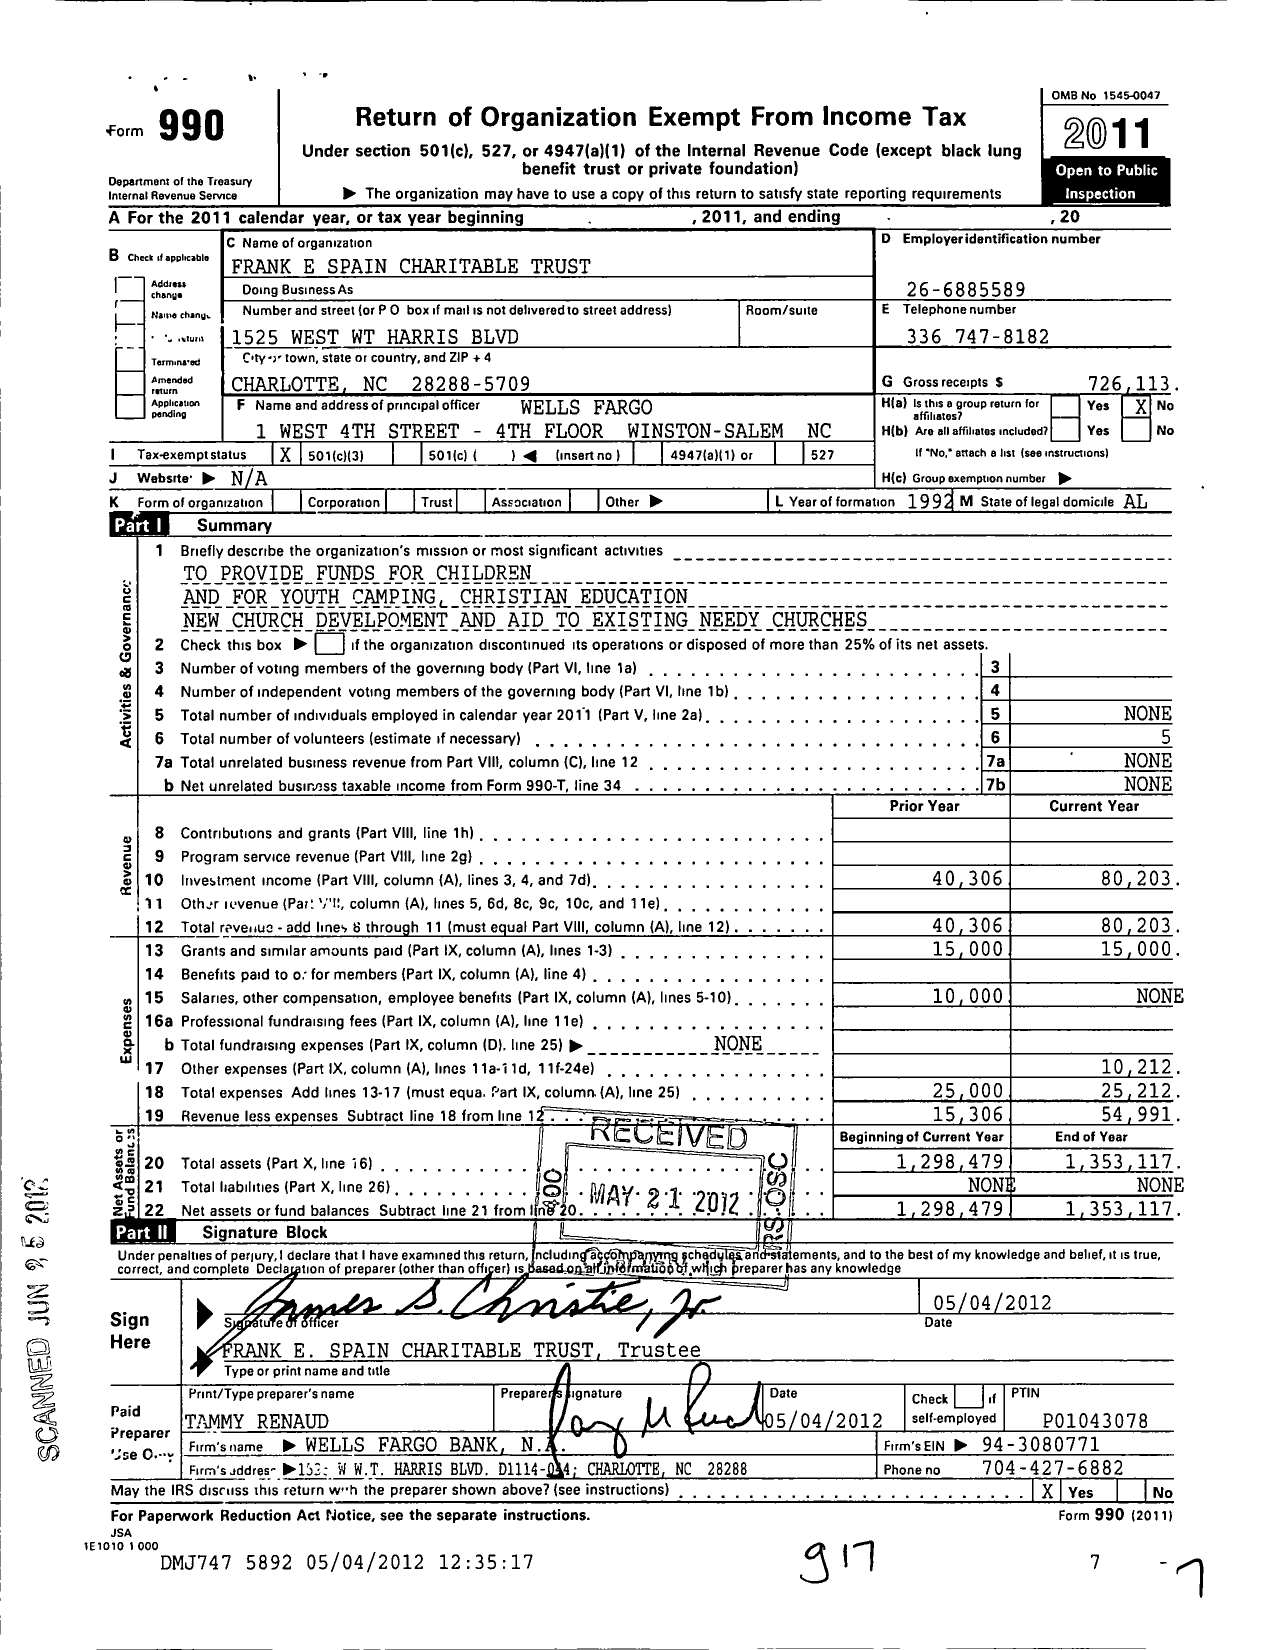 Image of first page of 2011 Form 990 for Frank E Spain Charitable Trust